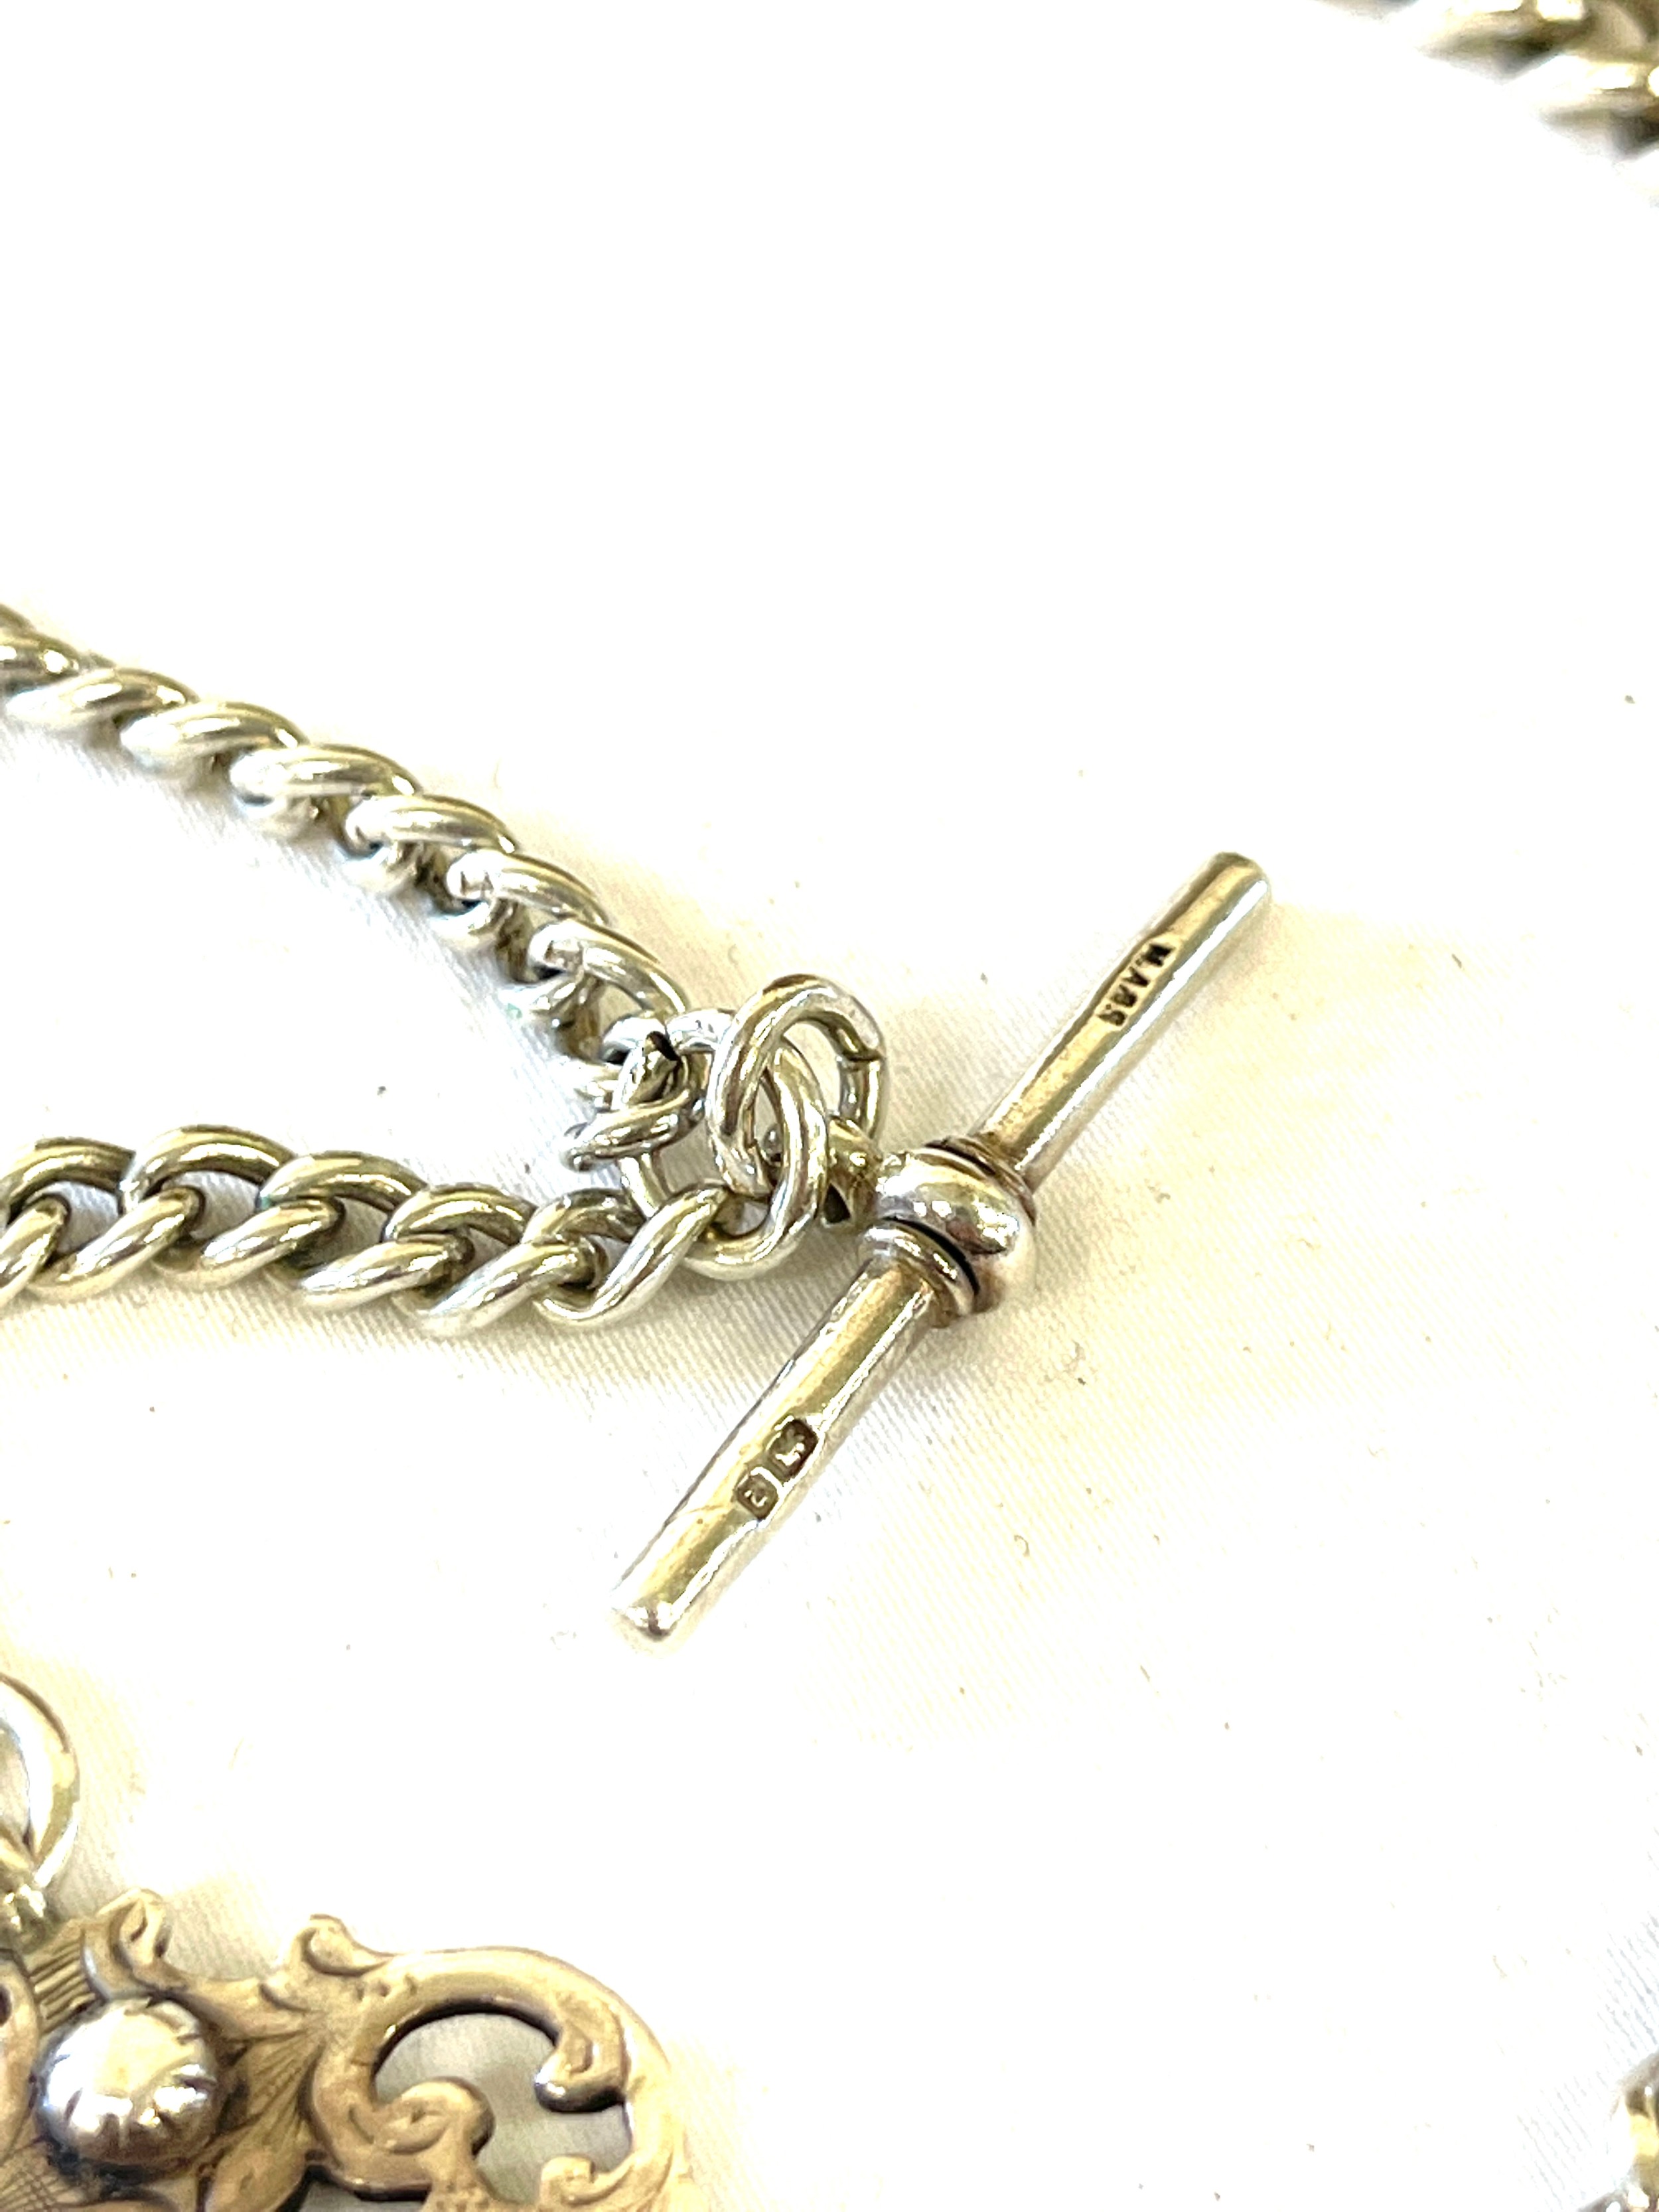 Silver hallmarked Albert watch chain, approximate weight 61g - Image 3 of 4